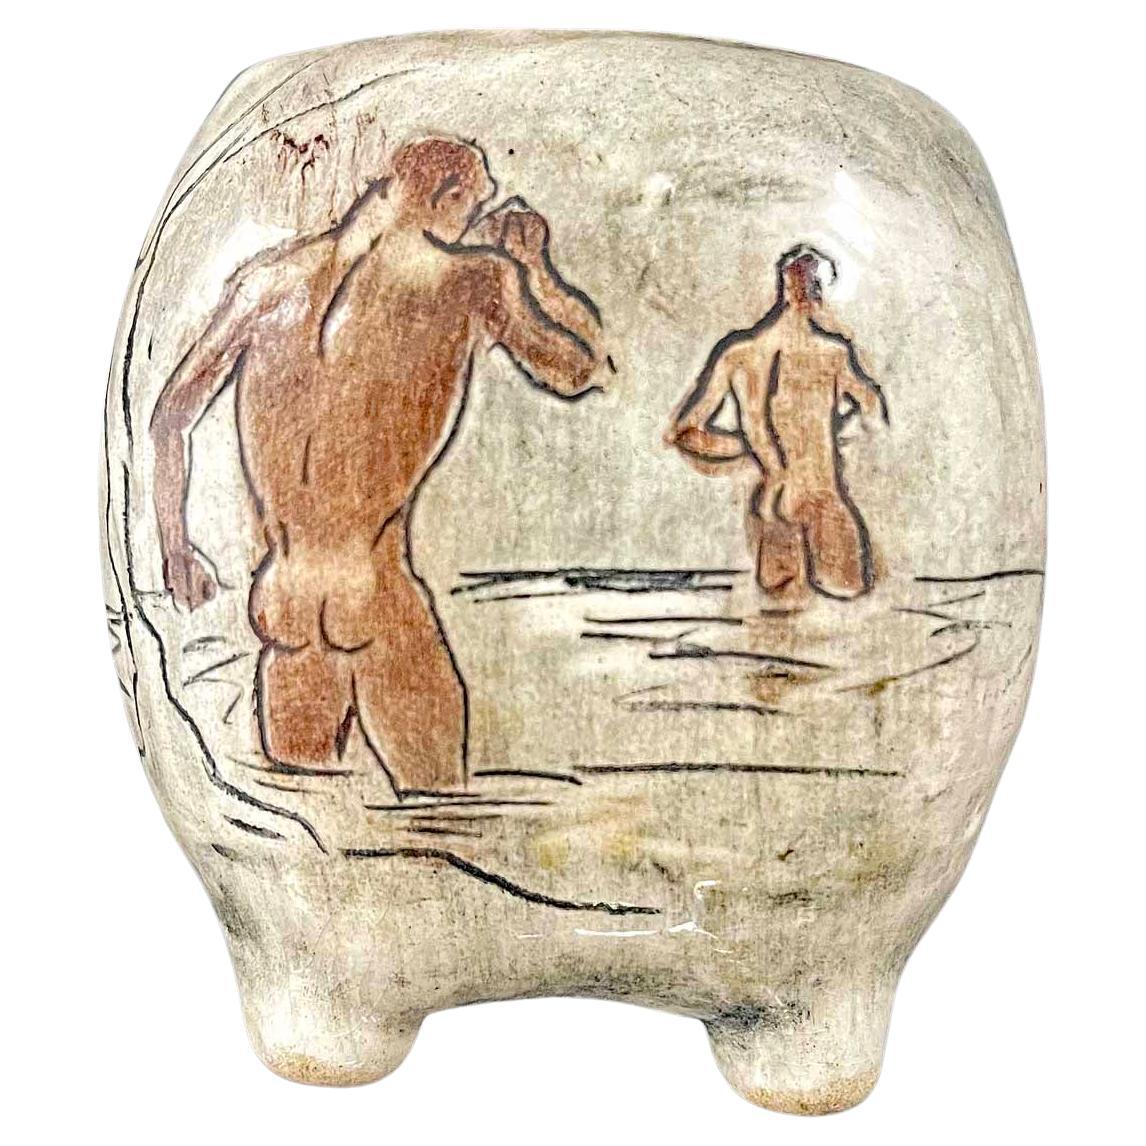 "Bathers at Laguna Beach", Hand-Formed Vase with Male Nudes by Stewart, 1952 For Sale